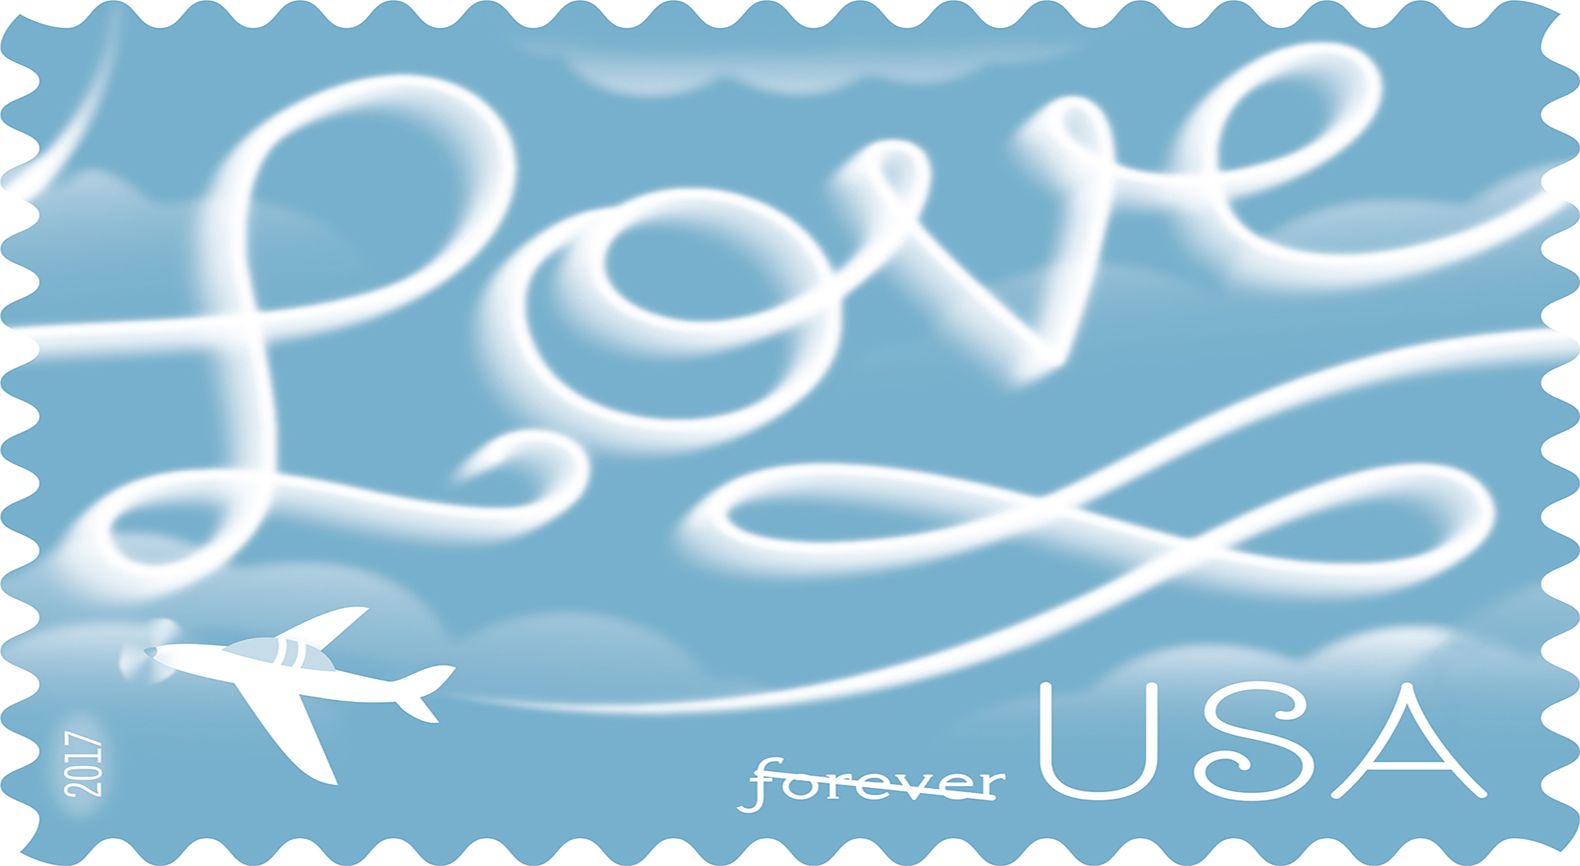 Love Is in the Air with the New Forever Stamp - Guideposts